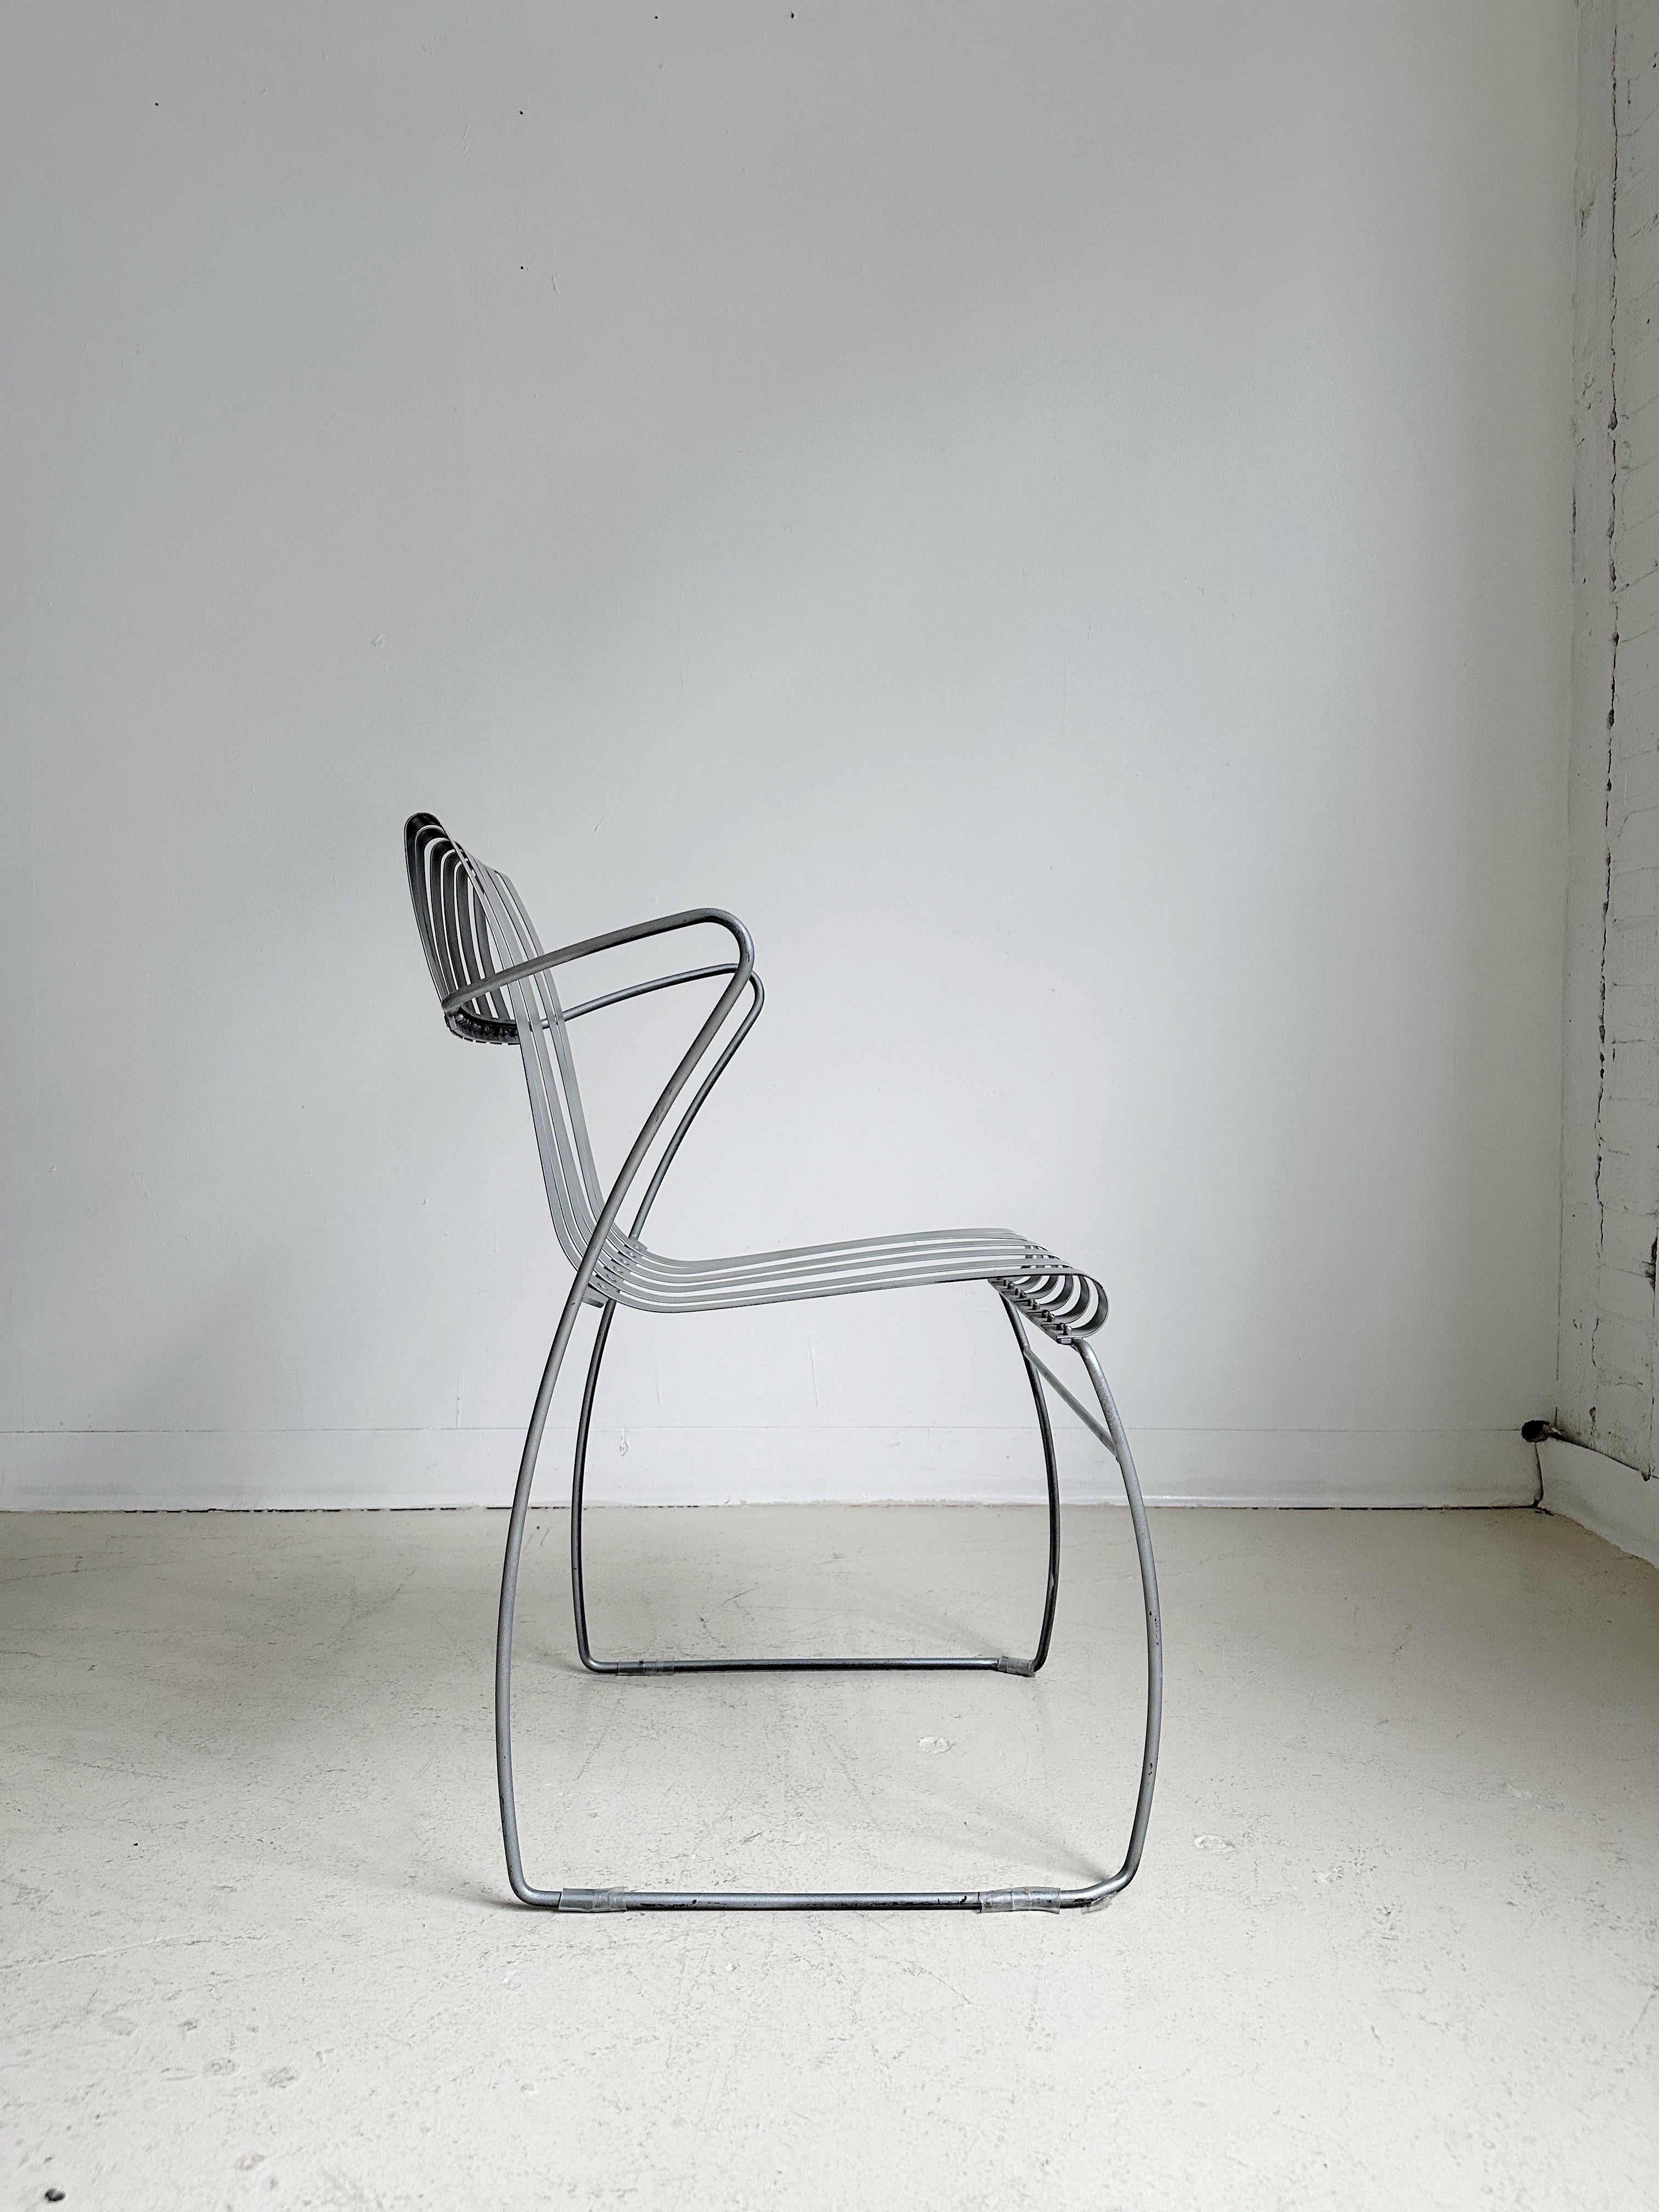 Handmade Sculptural Powder Coated Steel Chair In Excellent Condition For Sale In Outremont, QC